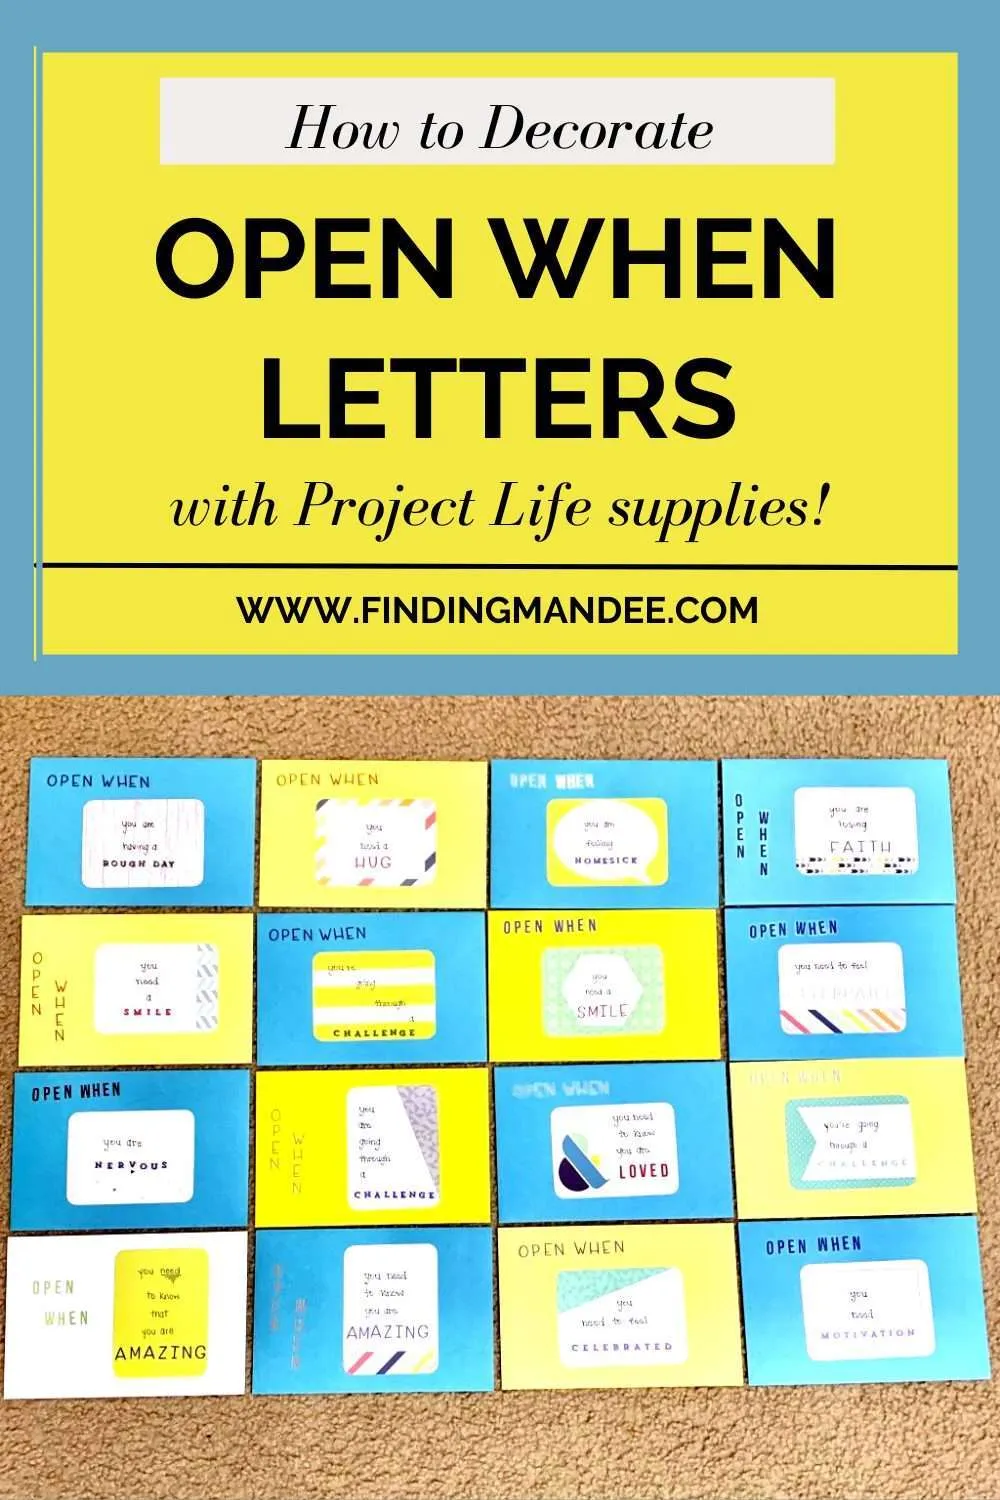 How to Decorate Open When Letters Using Project Life Supplies | Finding Mandee